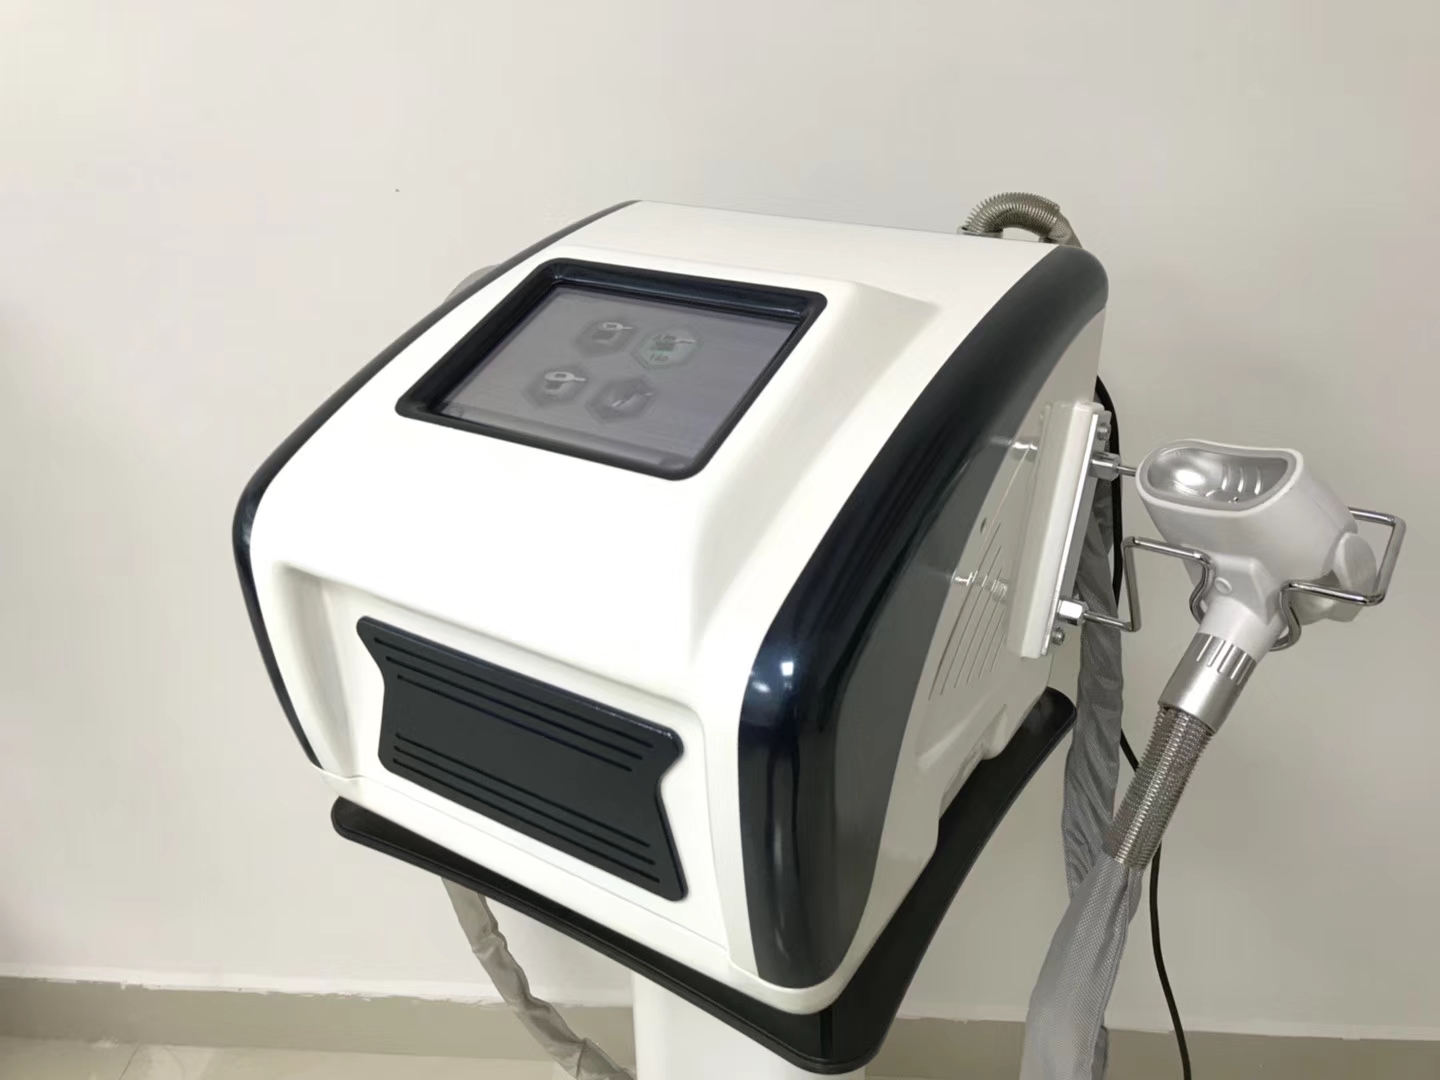 

2019 Hot Sales Cryolipolysis Fat Freezing Cool Body Slimming Machine With Double chin Handle Factory price